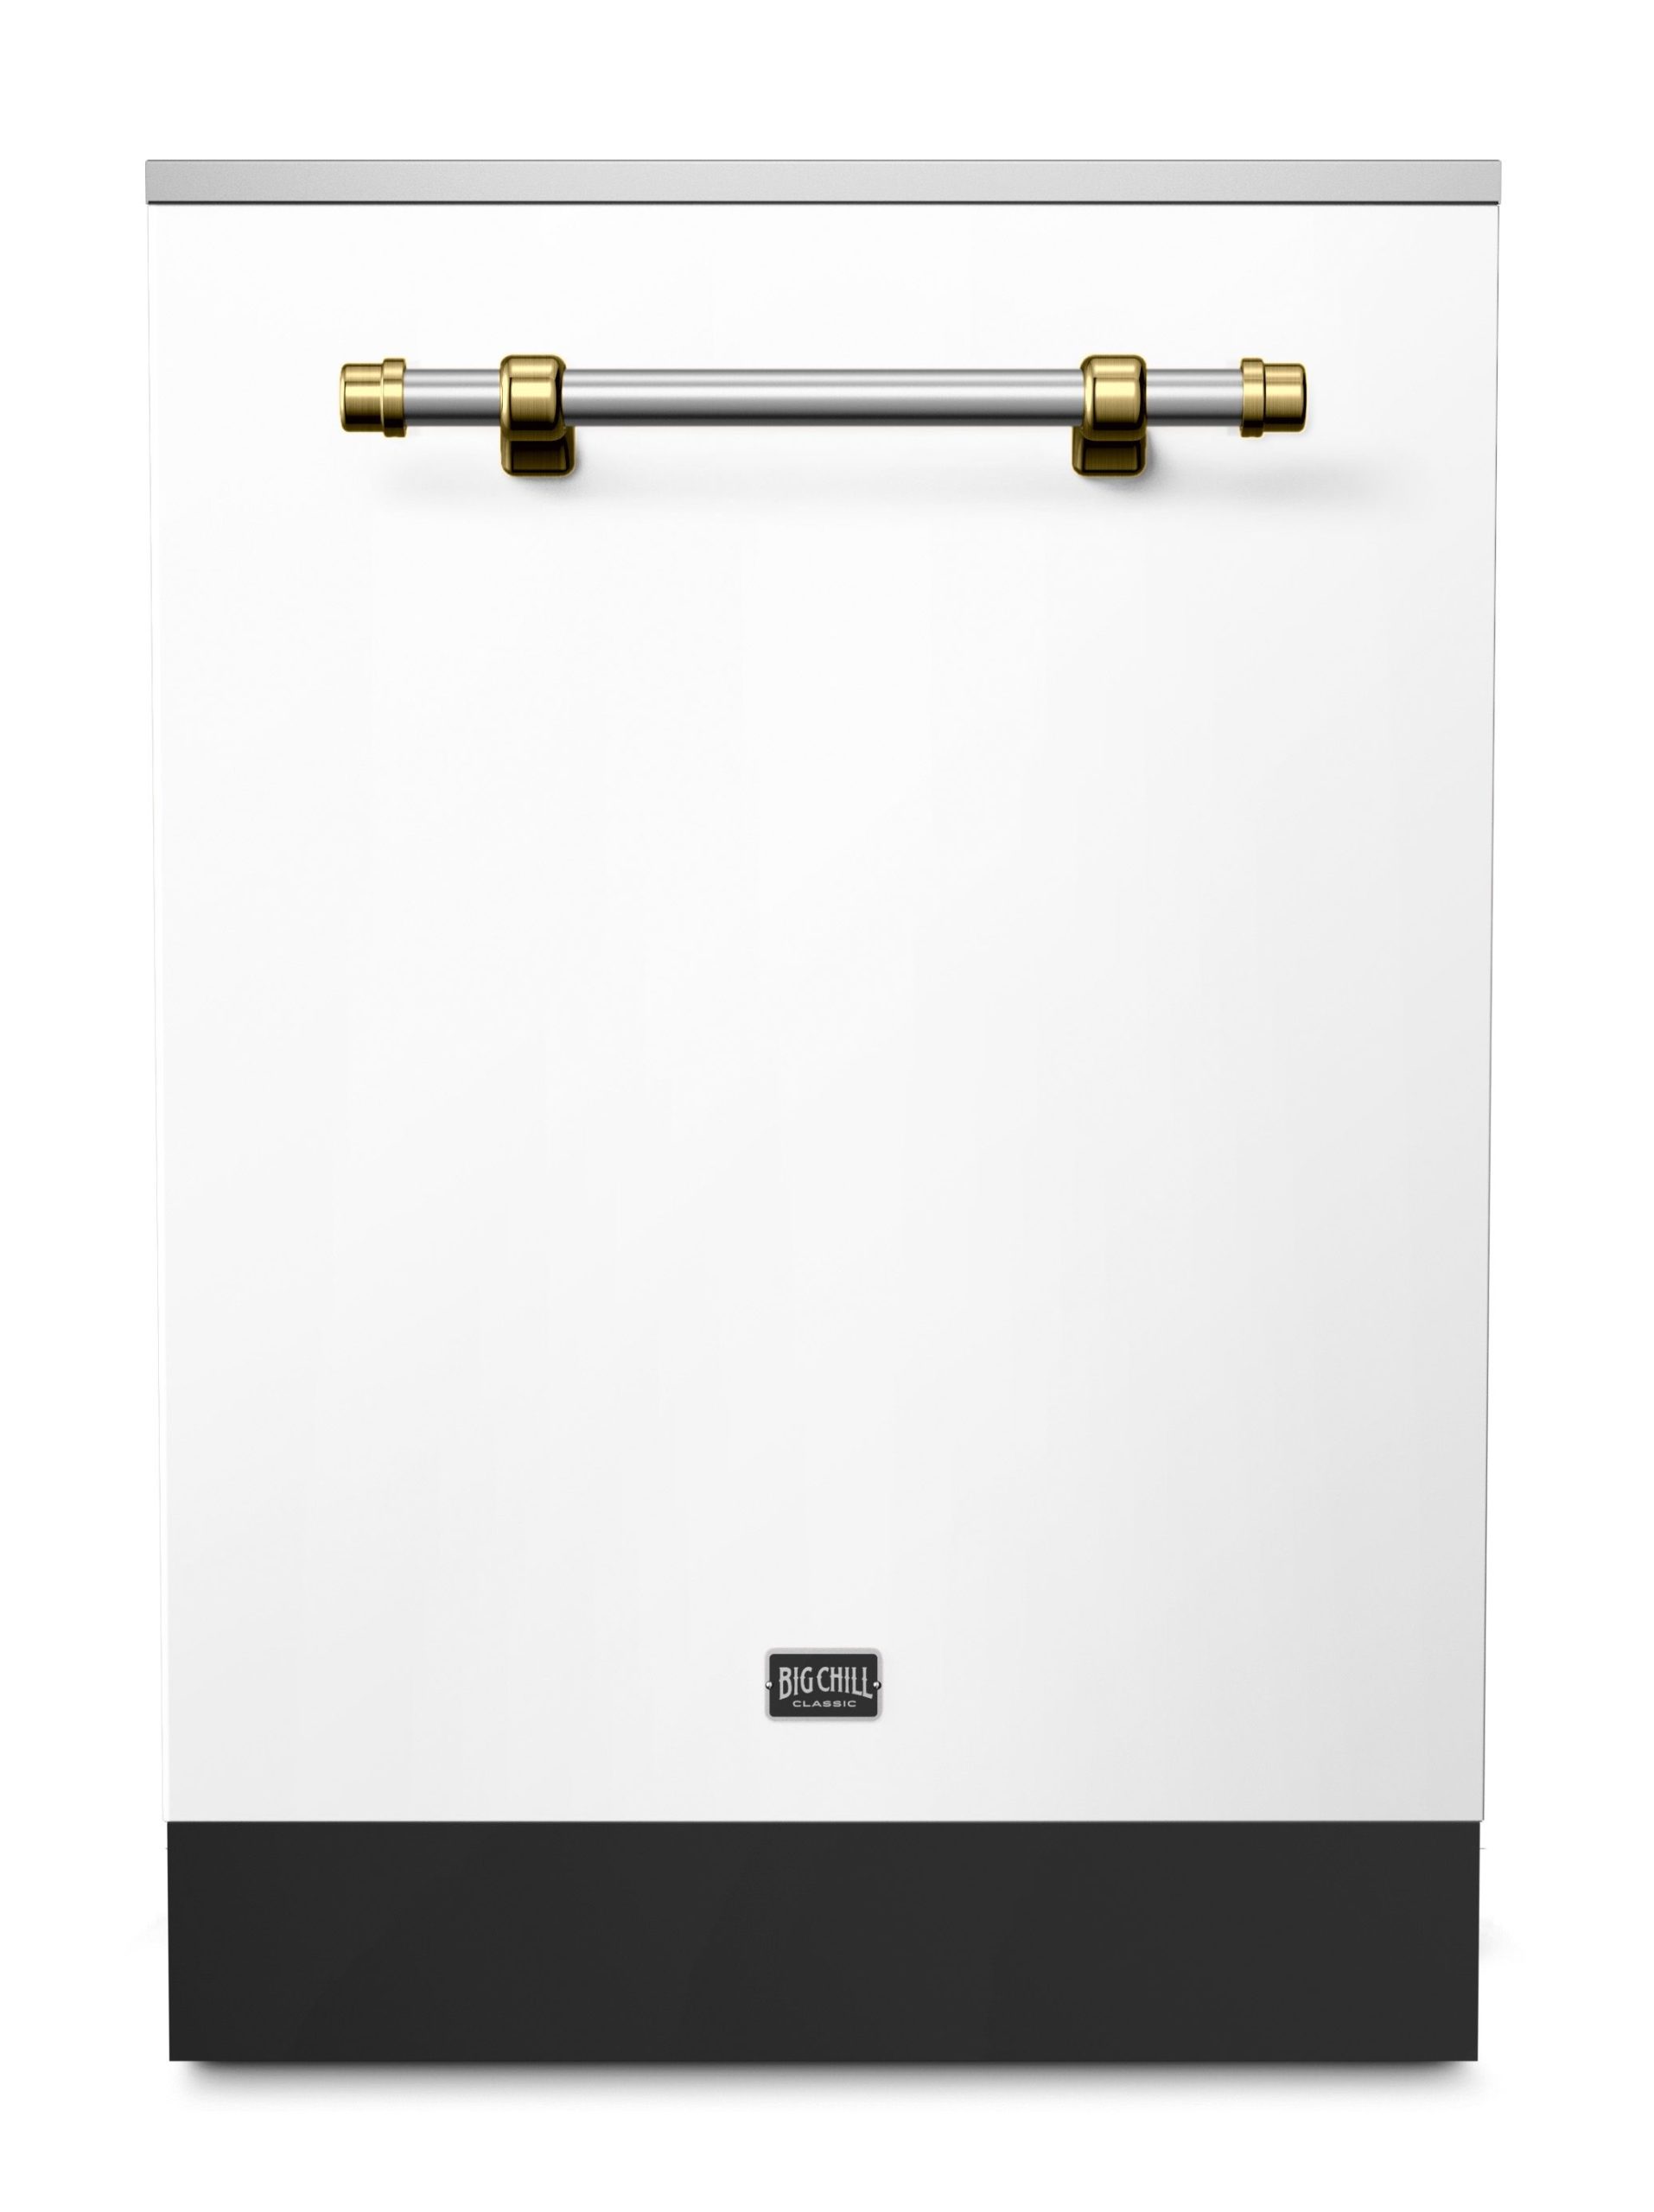 Big Chill Classic White Dishwasher with Brushed Brass